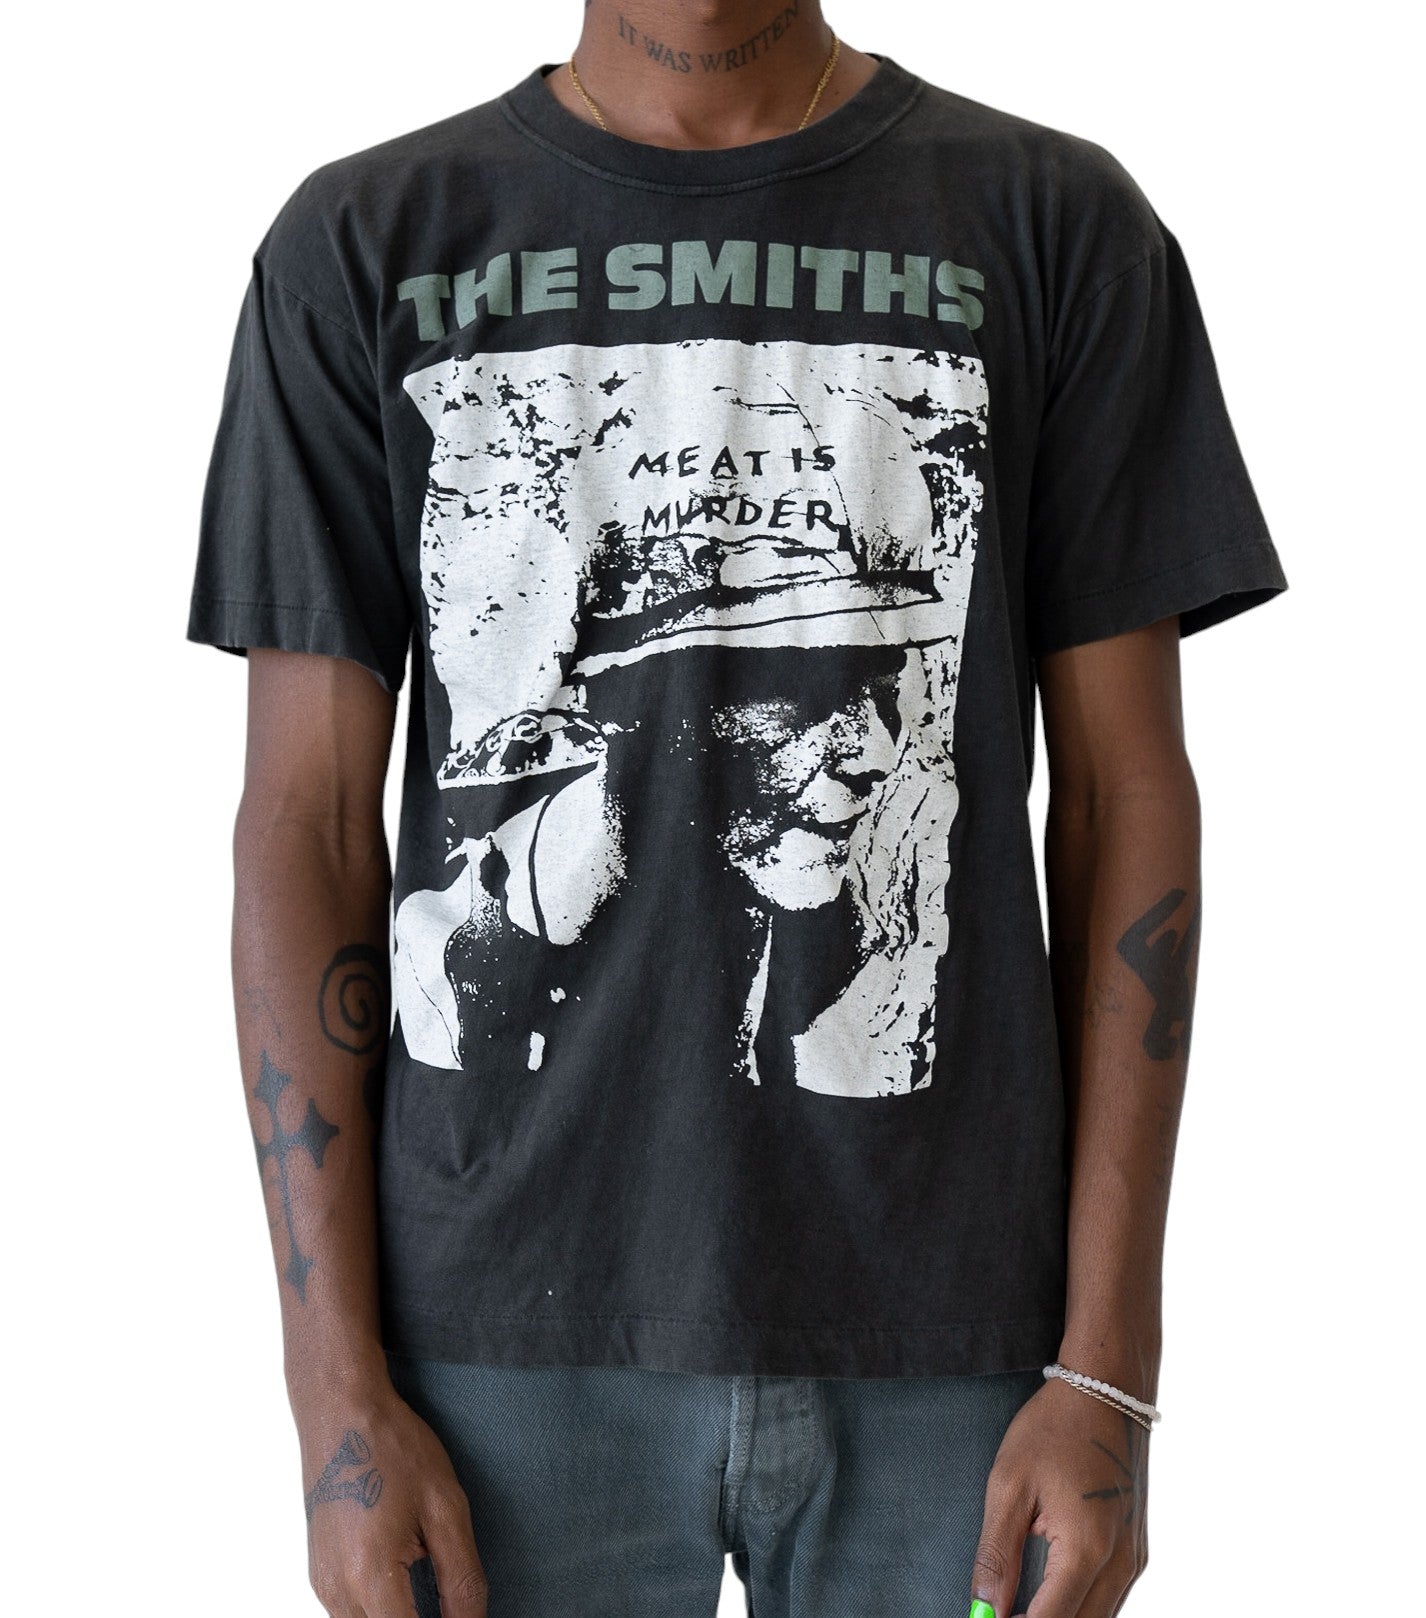 SINGLE STITCH THE SMITHS 'MEAT IS MURDER' TEE - 1980'S